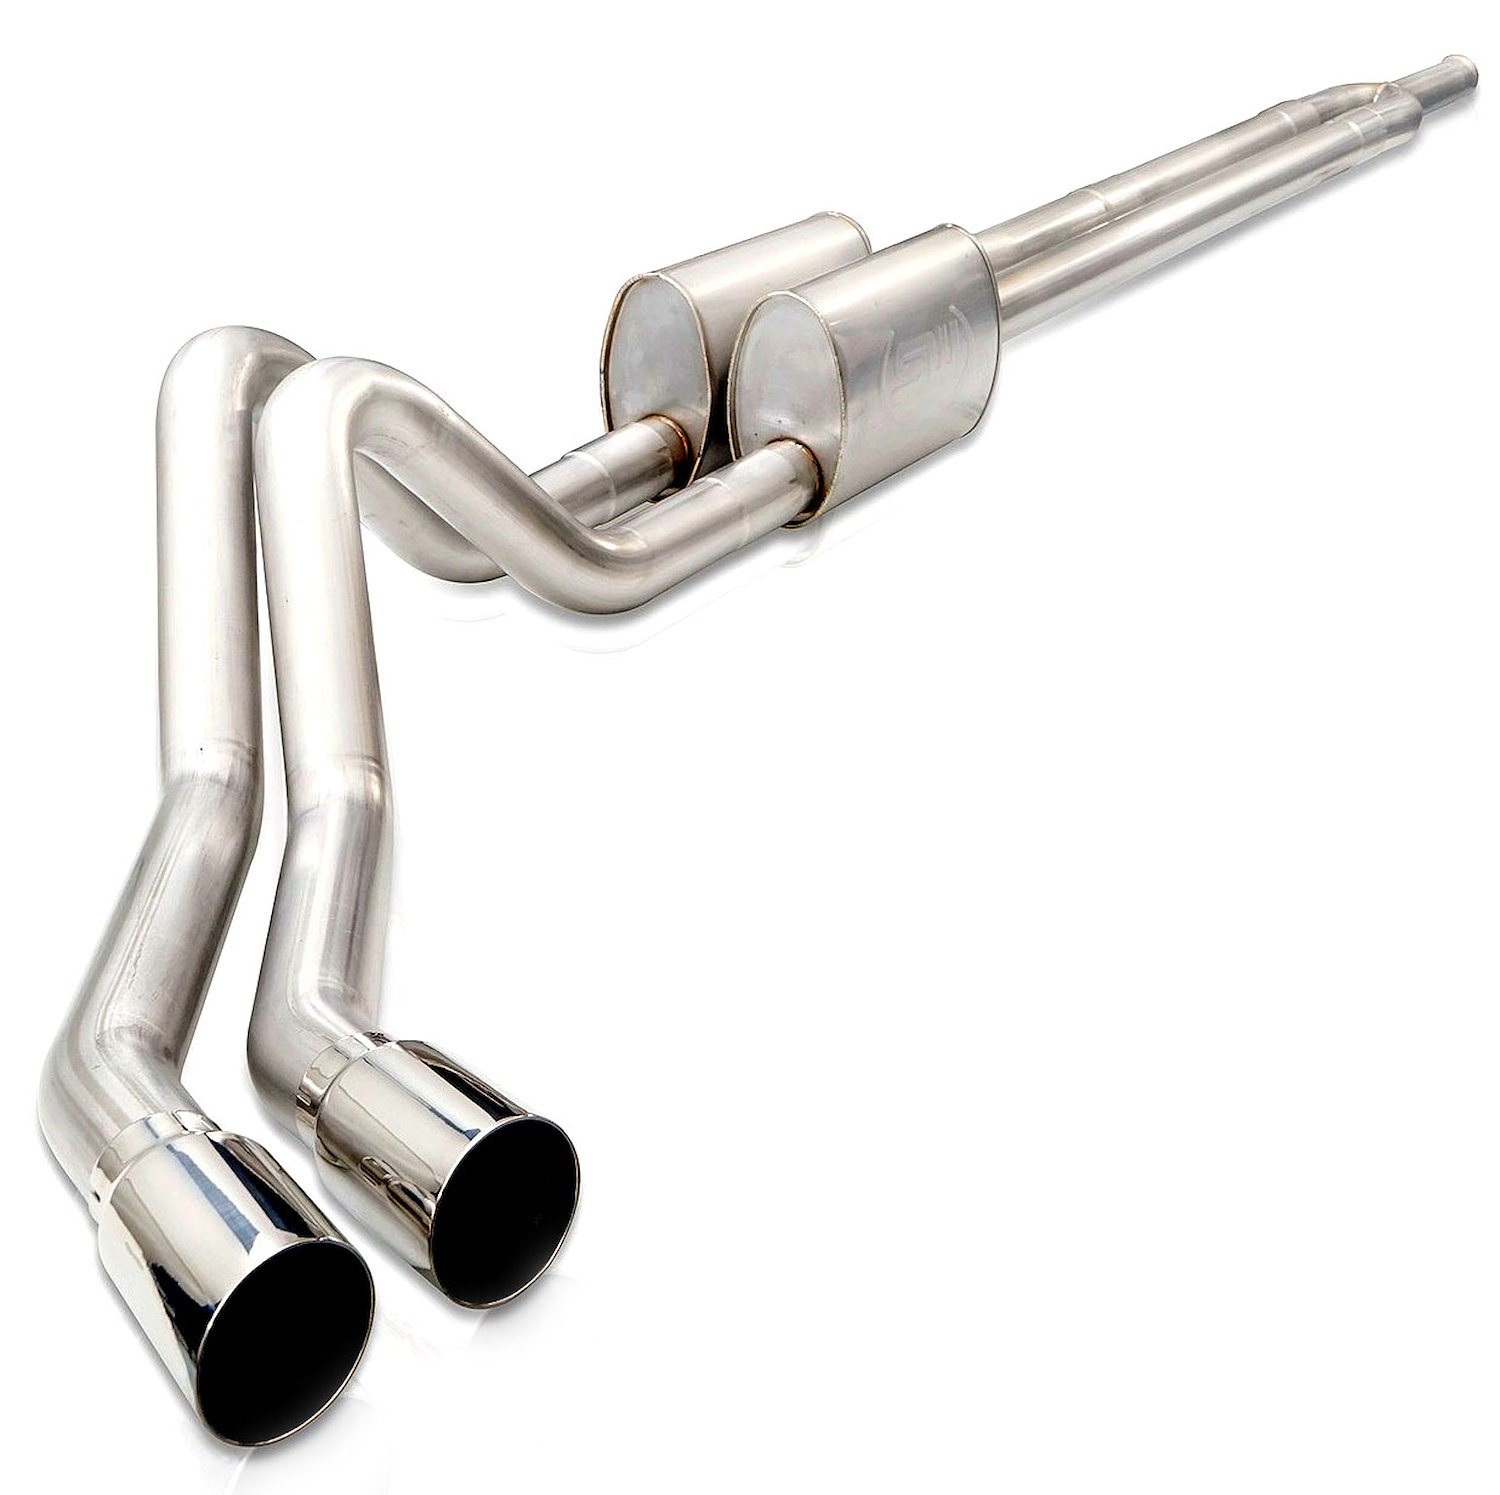 Redline Series Cat-Back Exhaust System 2019 Silverado/Sierra 1500 5.3L - 4 in. Polished Tips - Aggressive Sound